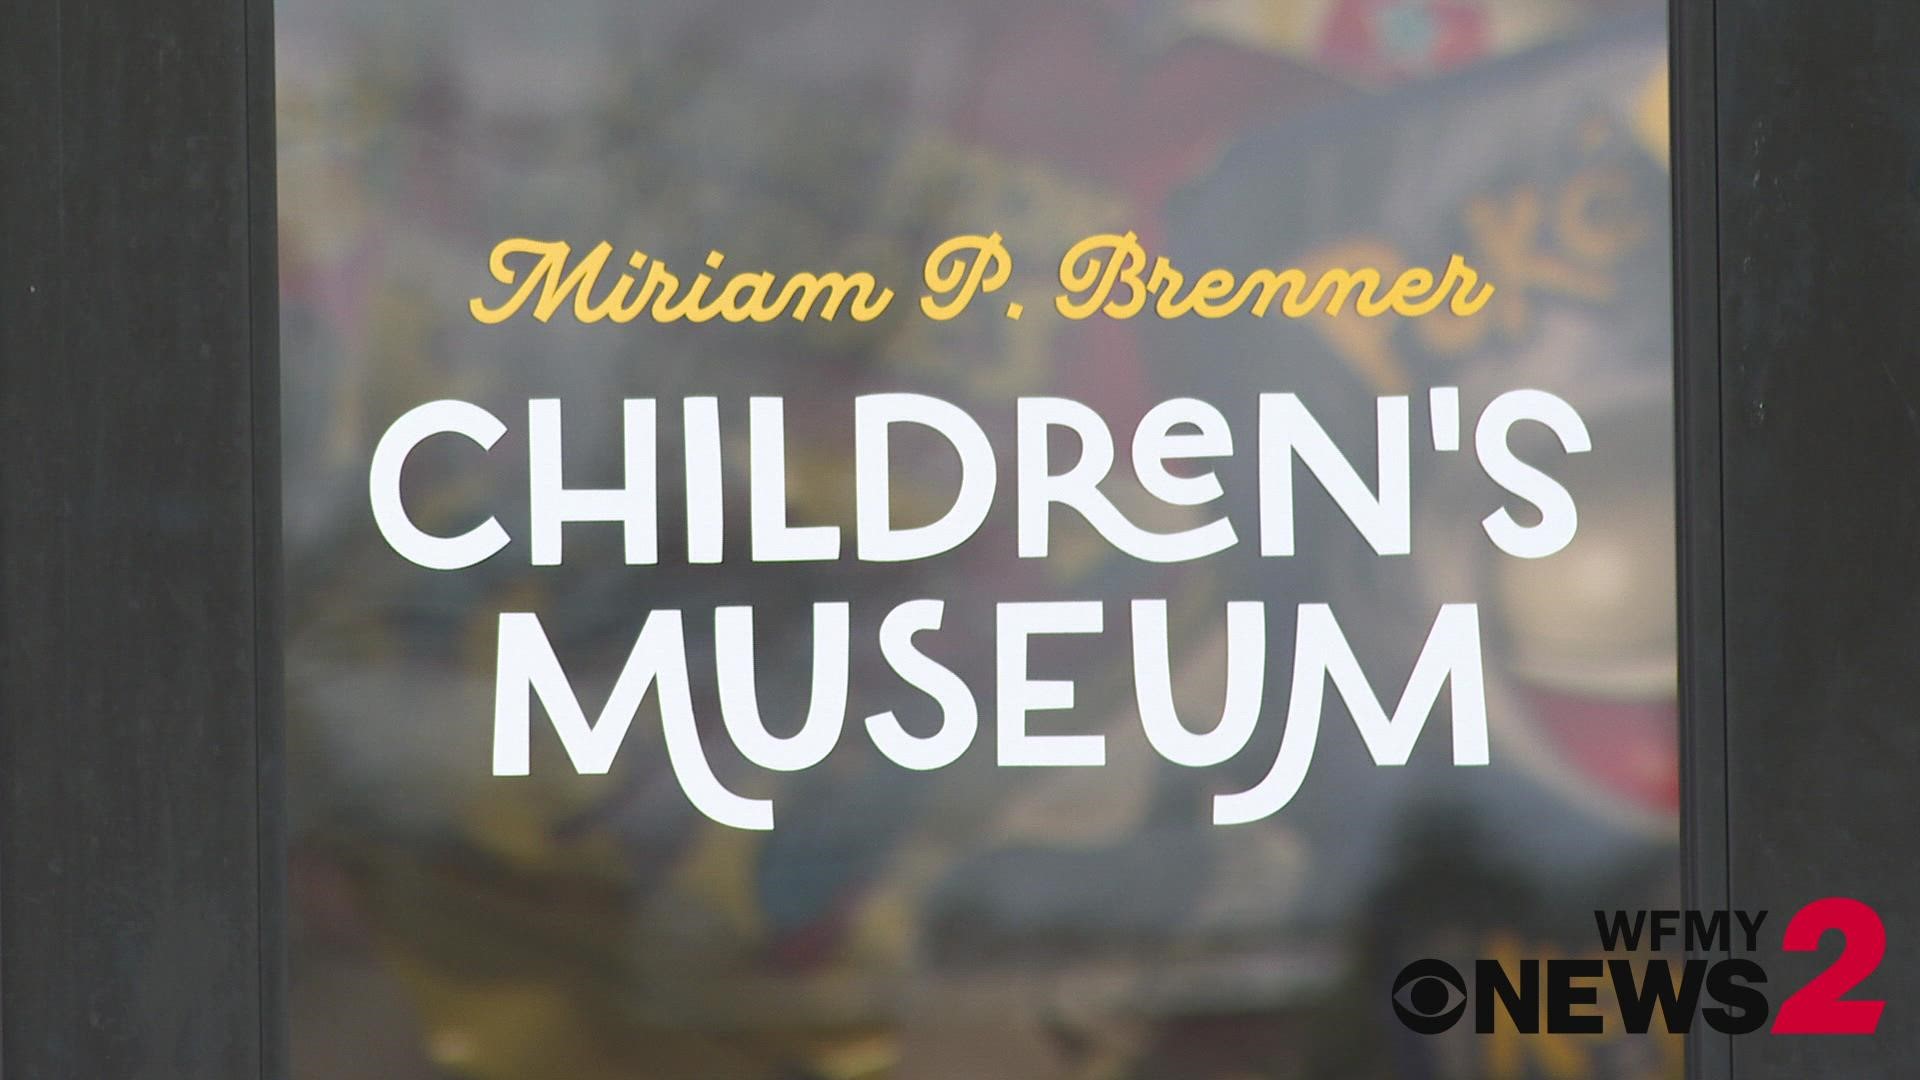 The Miriam P. Brenner Children's Museum, formerly known as the Greensboro Children's Museum is now back open after major renovations.